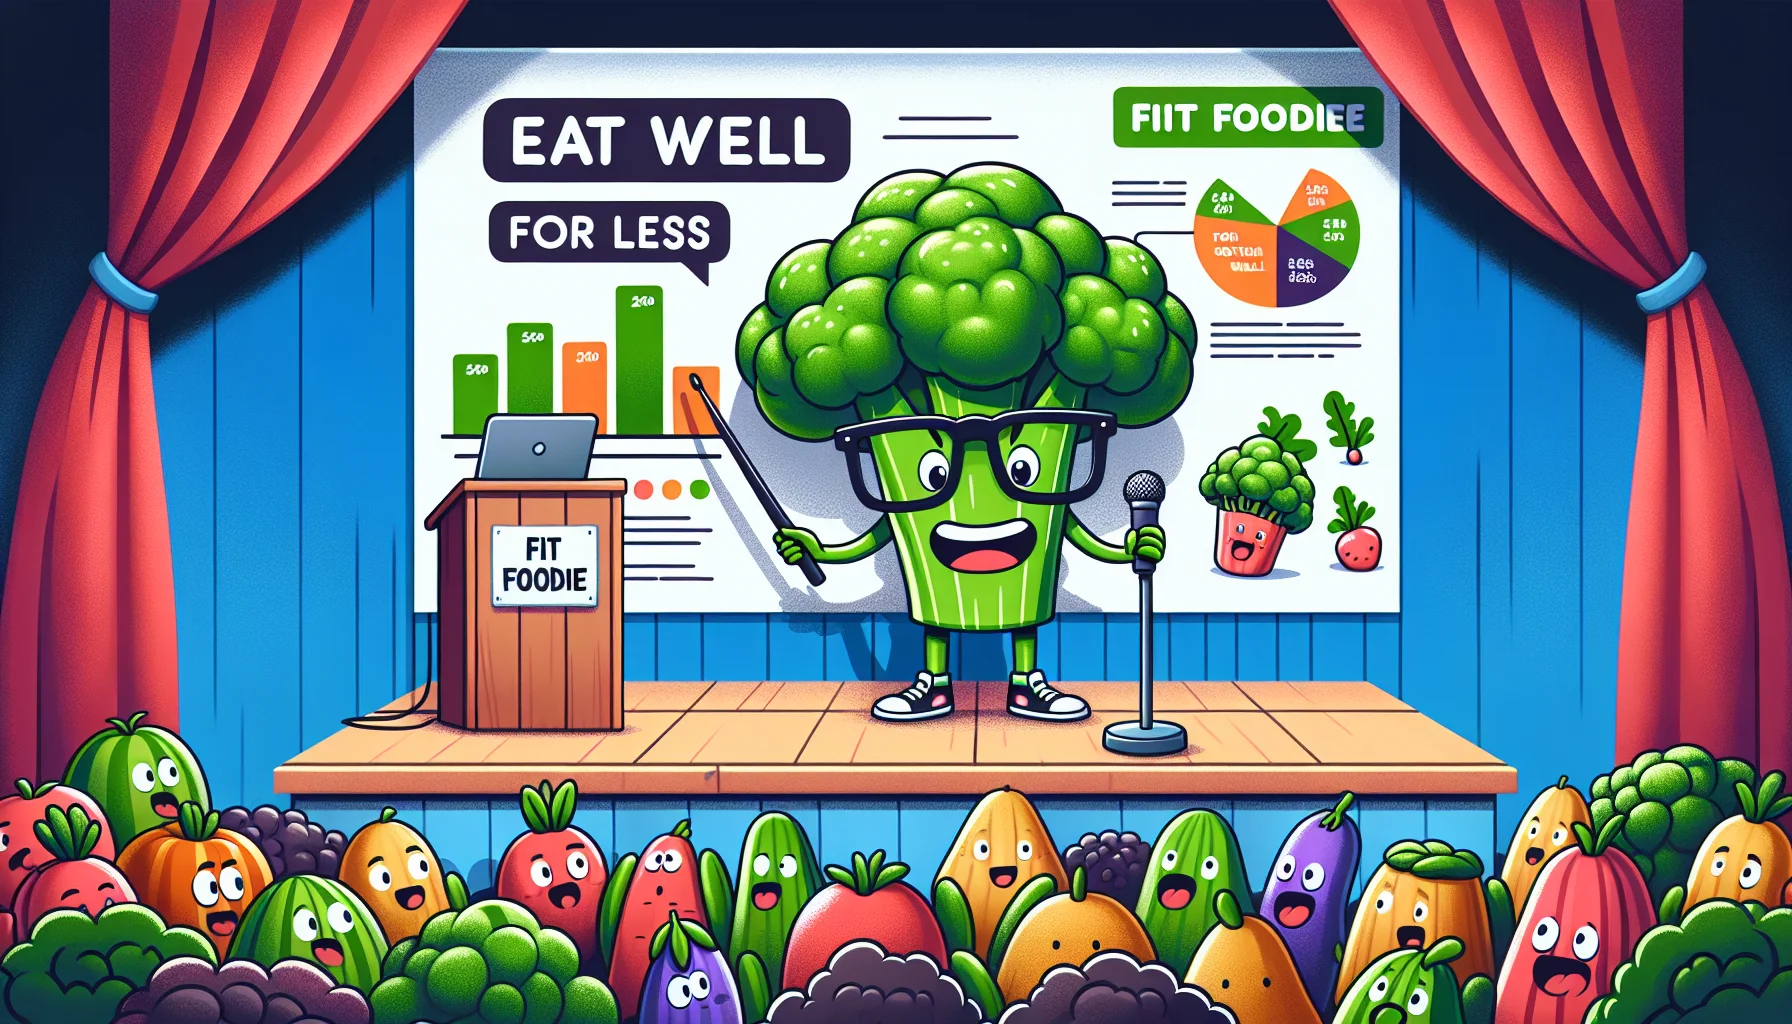 Envision a humorous scene promoting Fit Foodie Lifestyle Tips. In this lively image, a talking broccoli character is giving a talk on a stage to an amused crowd of various vegetables. The stage's backdrop, adorned with colorful fruits and vegetables, displays a slogan, 'Eat Well For Less'. The broccoli is wearing glasses and holding a pointer, pointing at a large infographics chart showing how to eat healthy on a budget. A banner on the side of the stage shares the message 'Healthy Habits, Healthy Wallet'.